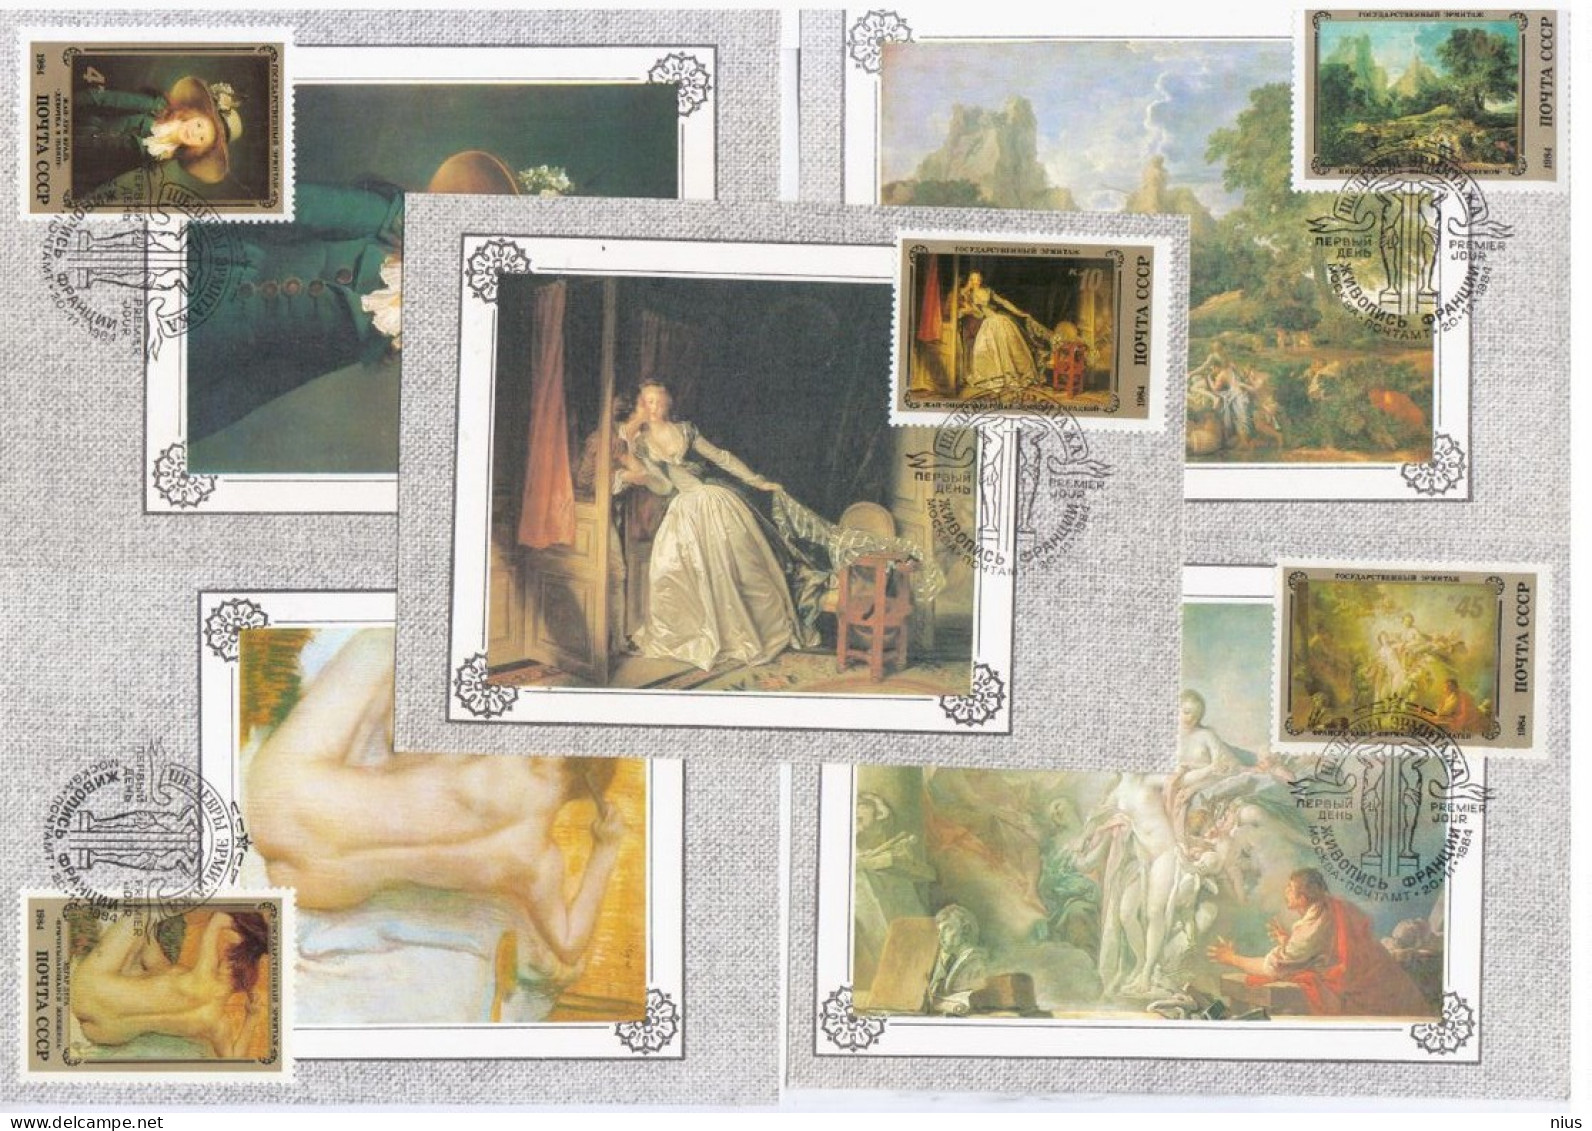 Russia USSR 1984 Maximum Cards X5 French Paintings In Hermitage, France Painters Boucher Degas Poussin Fragonard Vuaille - Cartes Maximum